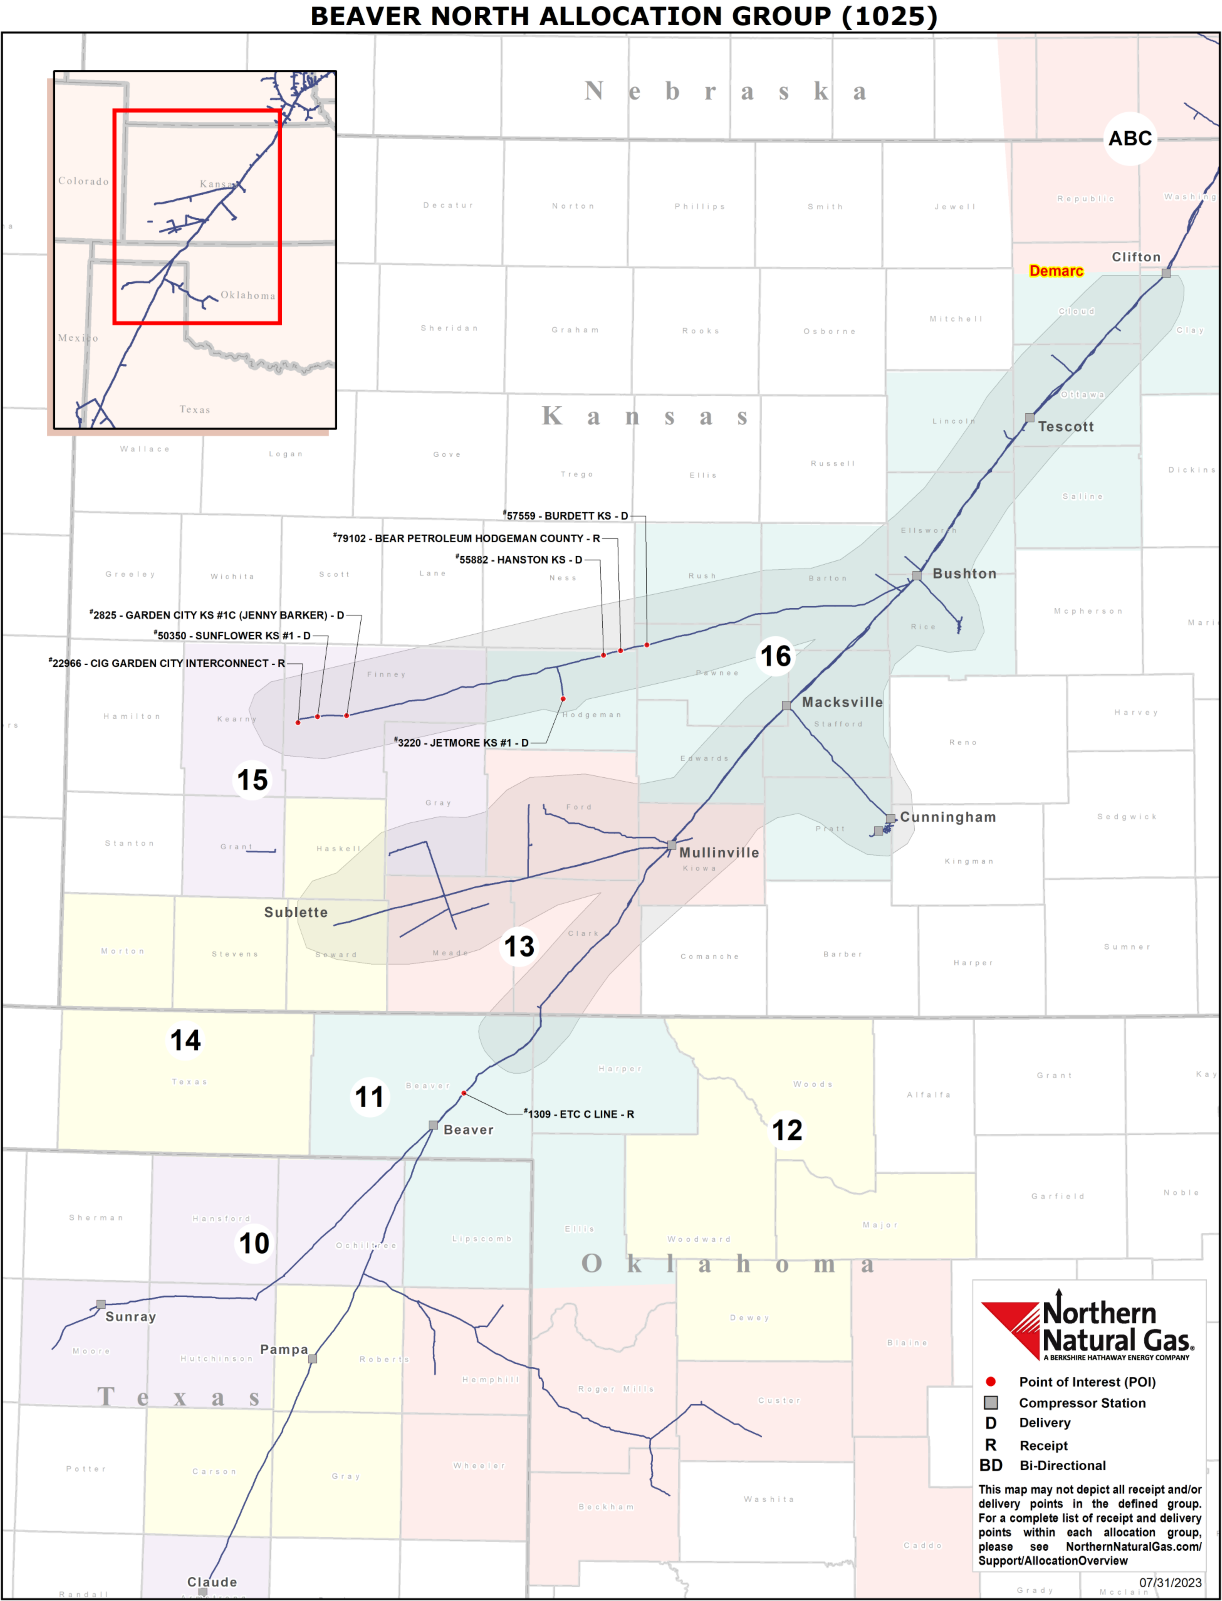 (1025) Beaver North Allocation Group Map